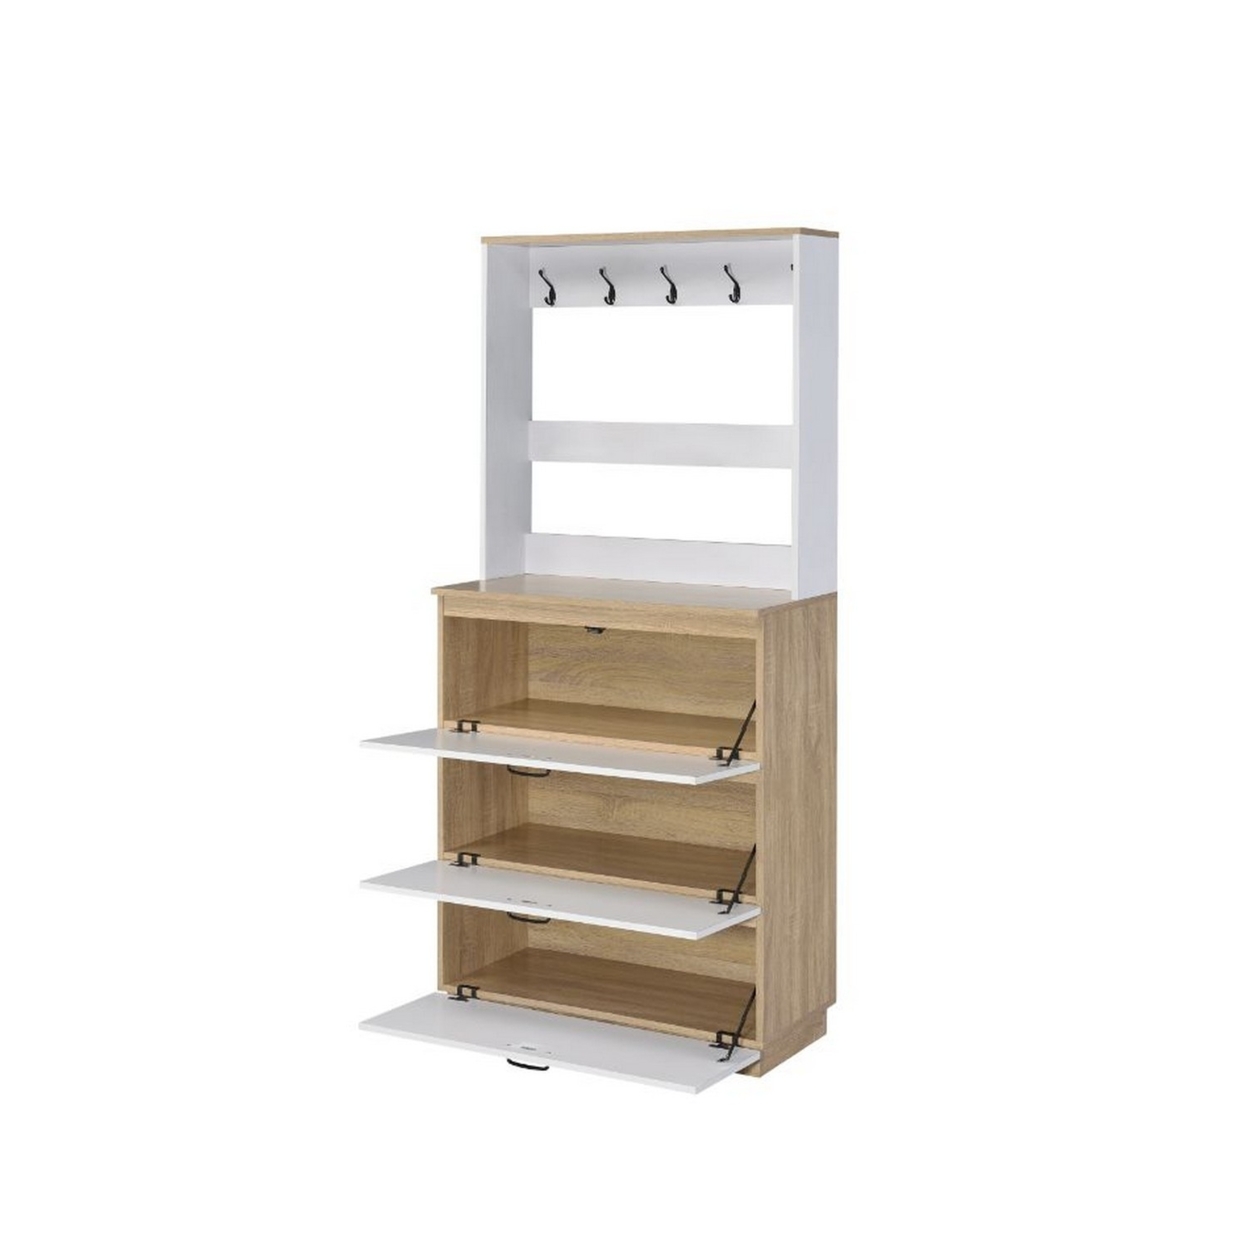 Shoe Cabinet With Storage Drawers And Hooks, White And Brown- Saltoro Sherpi